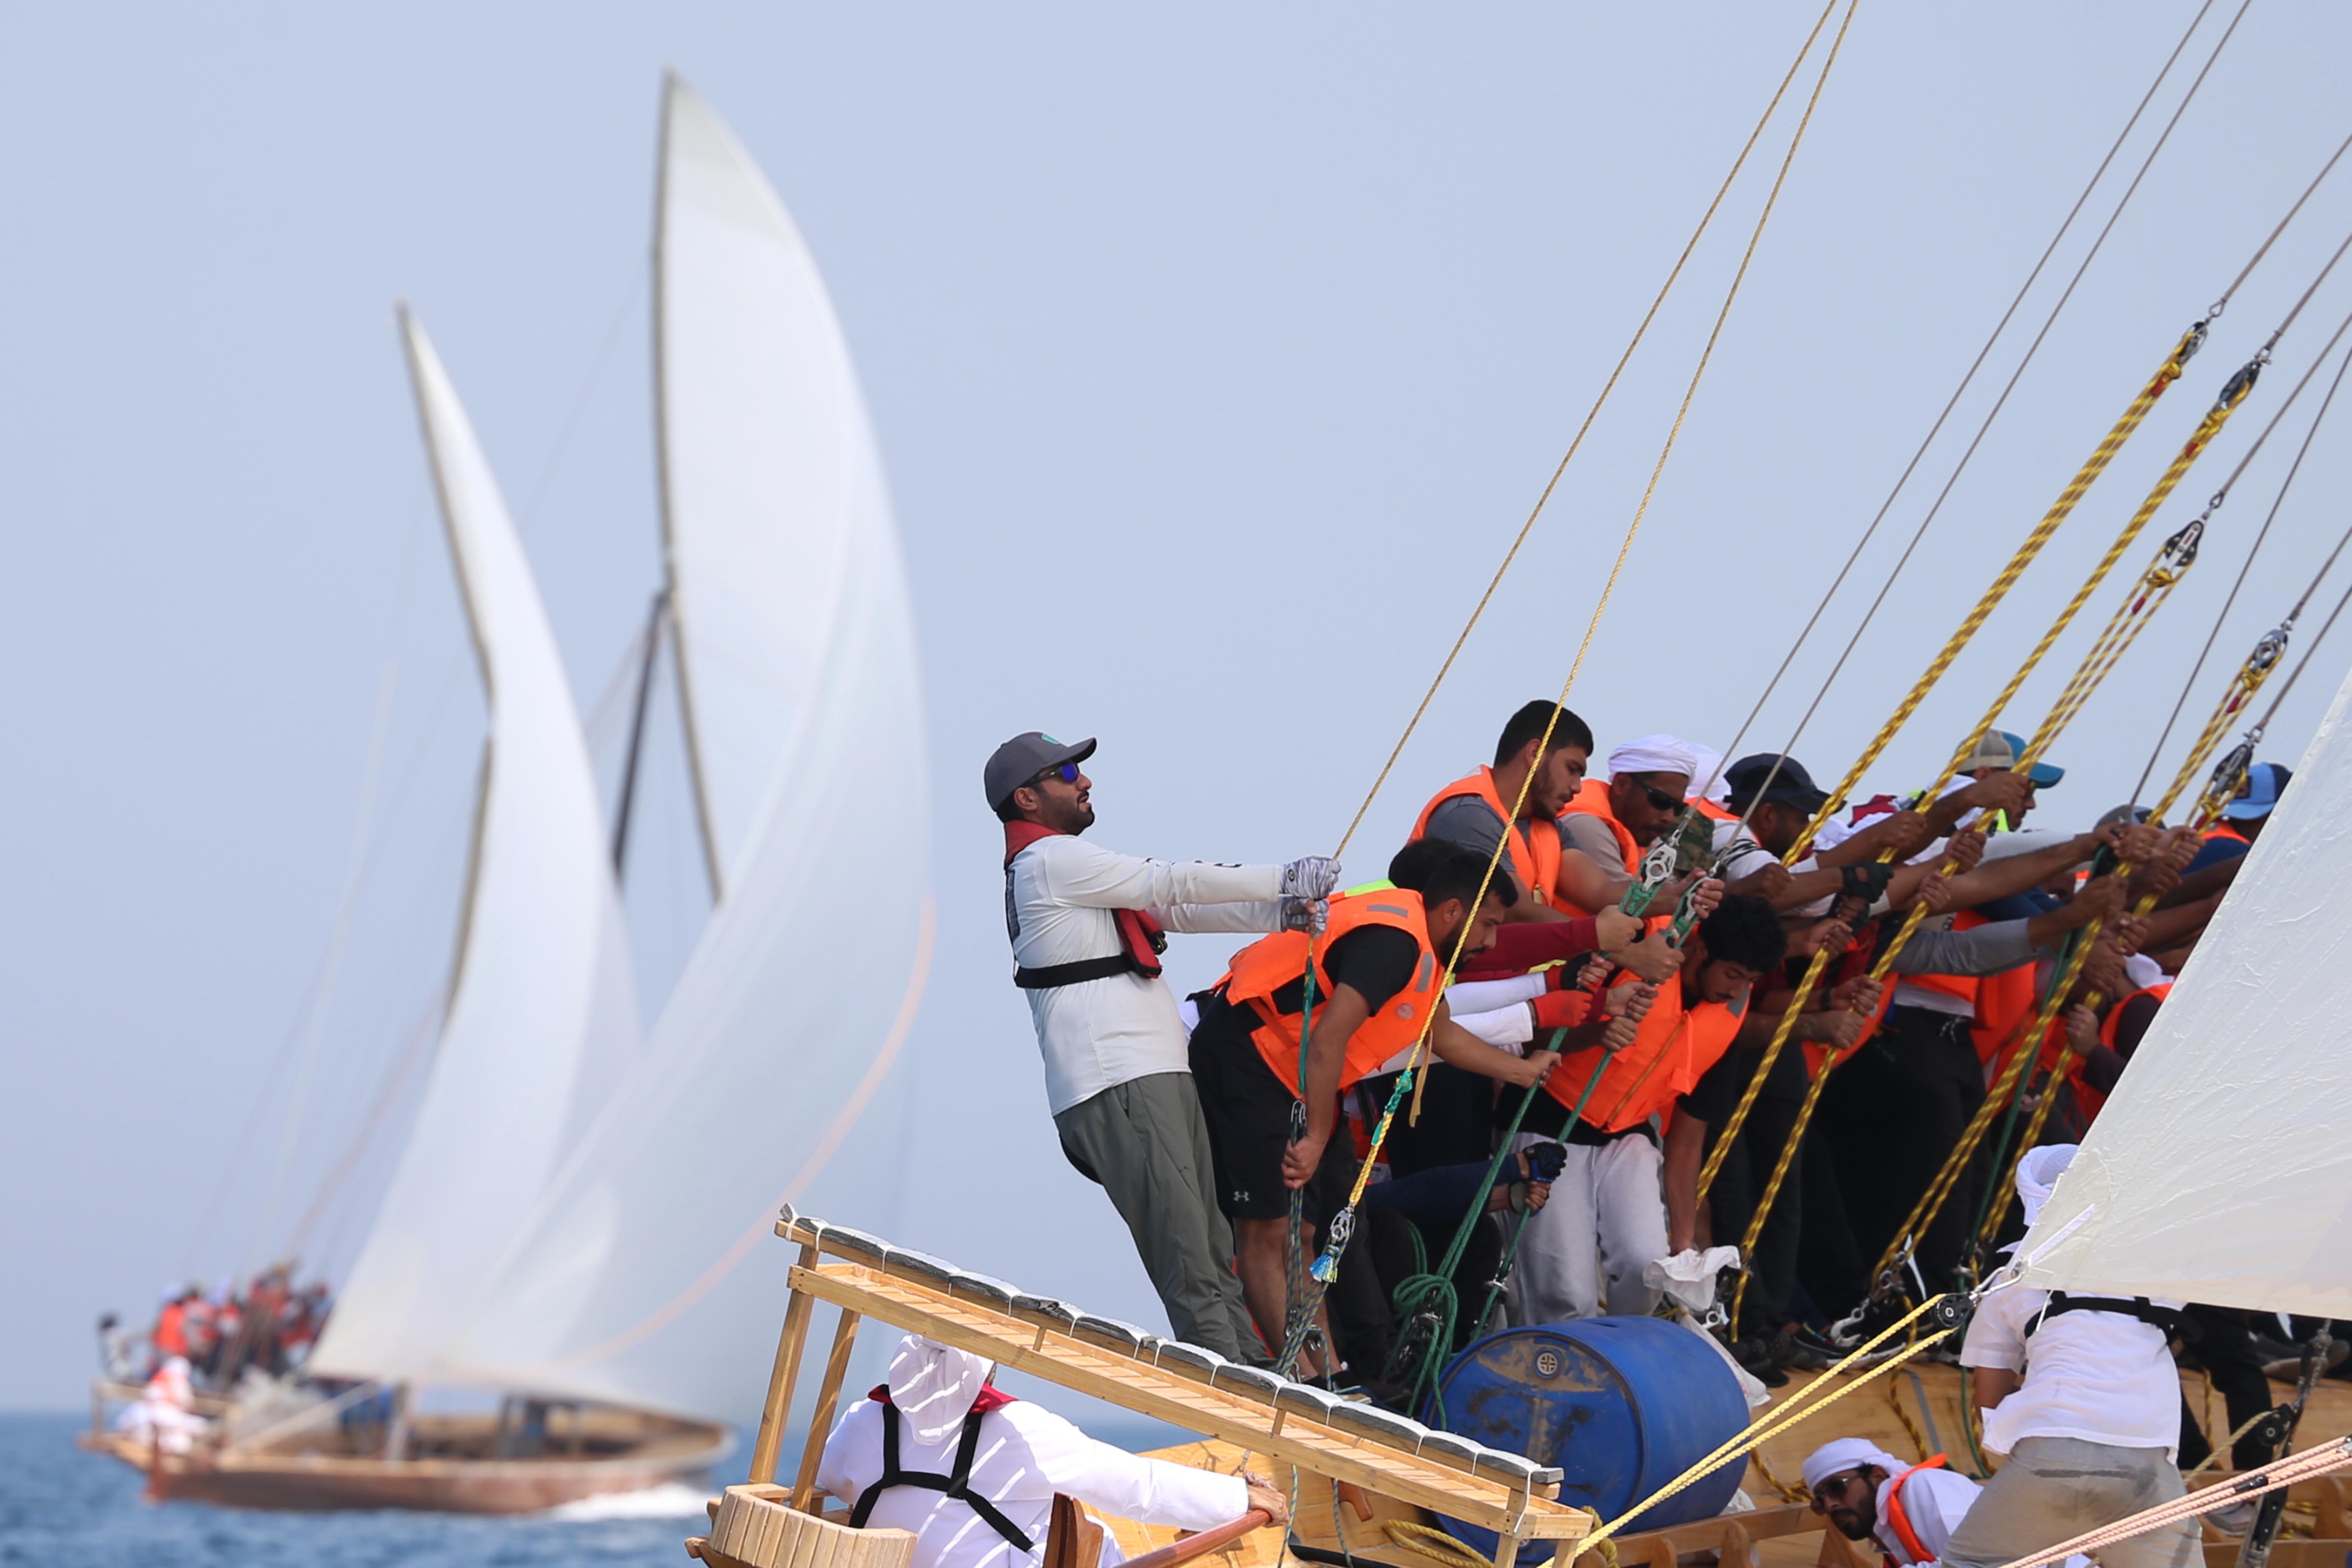 60ft Dhow Sailing Race in Dubai Shore Today